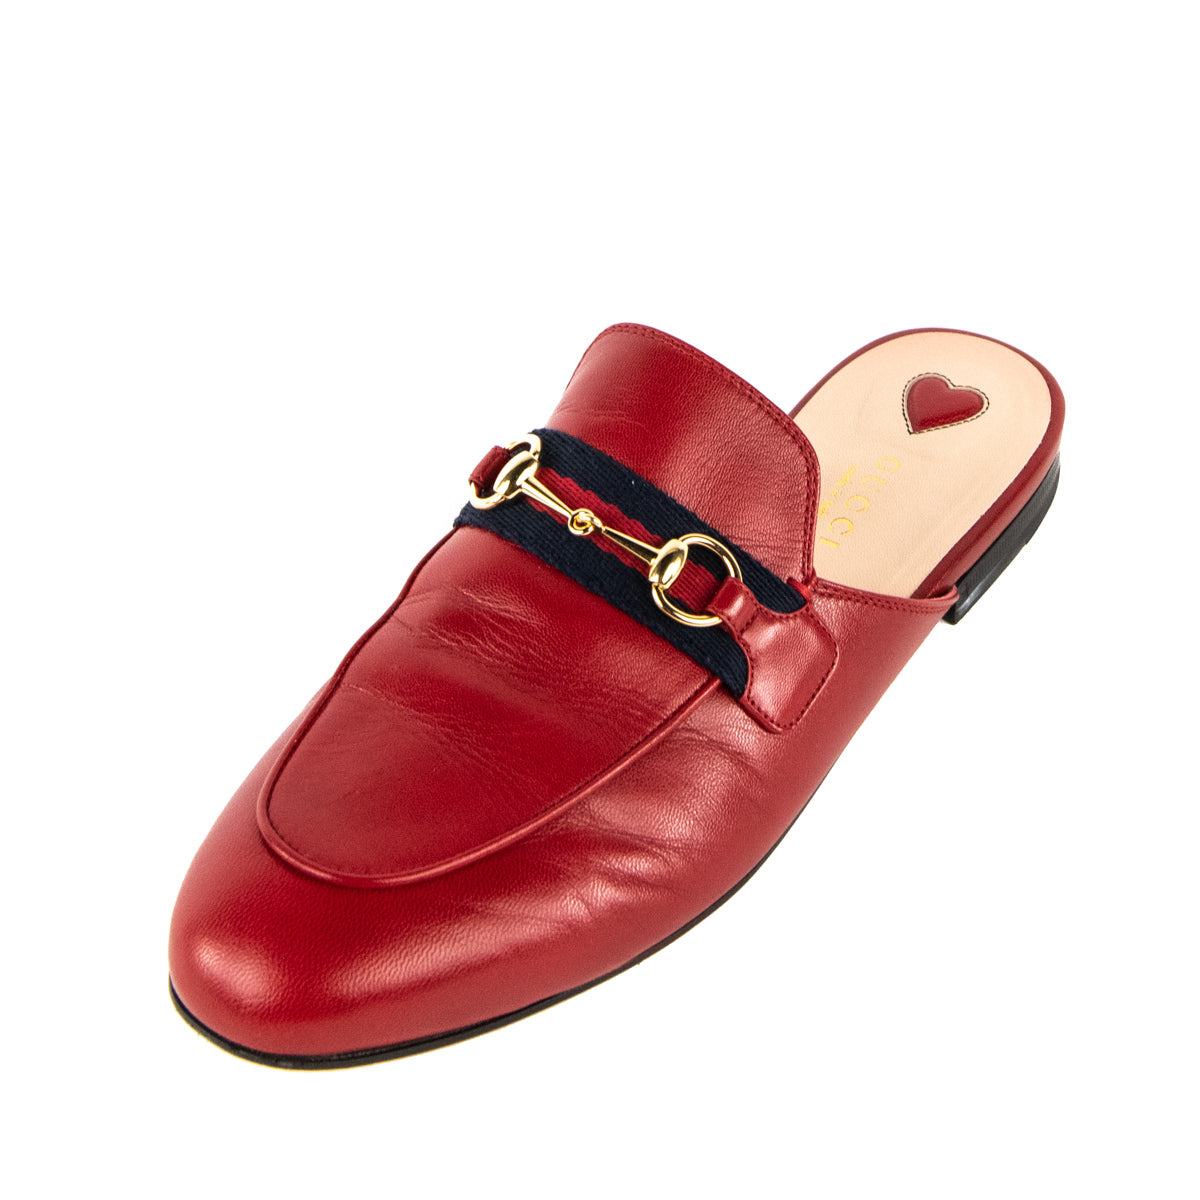 Gucci Red Leather Web Princetown Mules Size US 9 | EU 39 - Love that Bag etc - Preowned Authentic Designer Handbags & Preloved Fashions